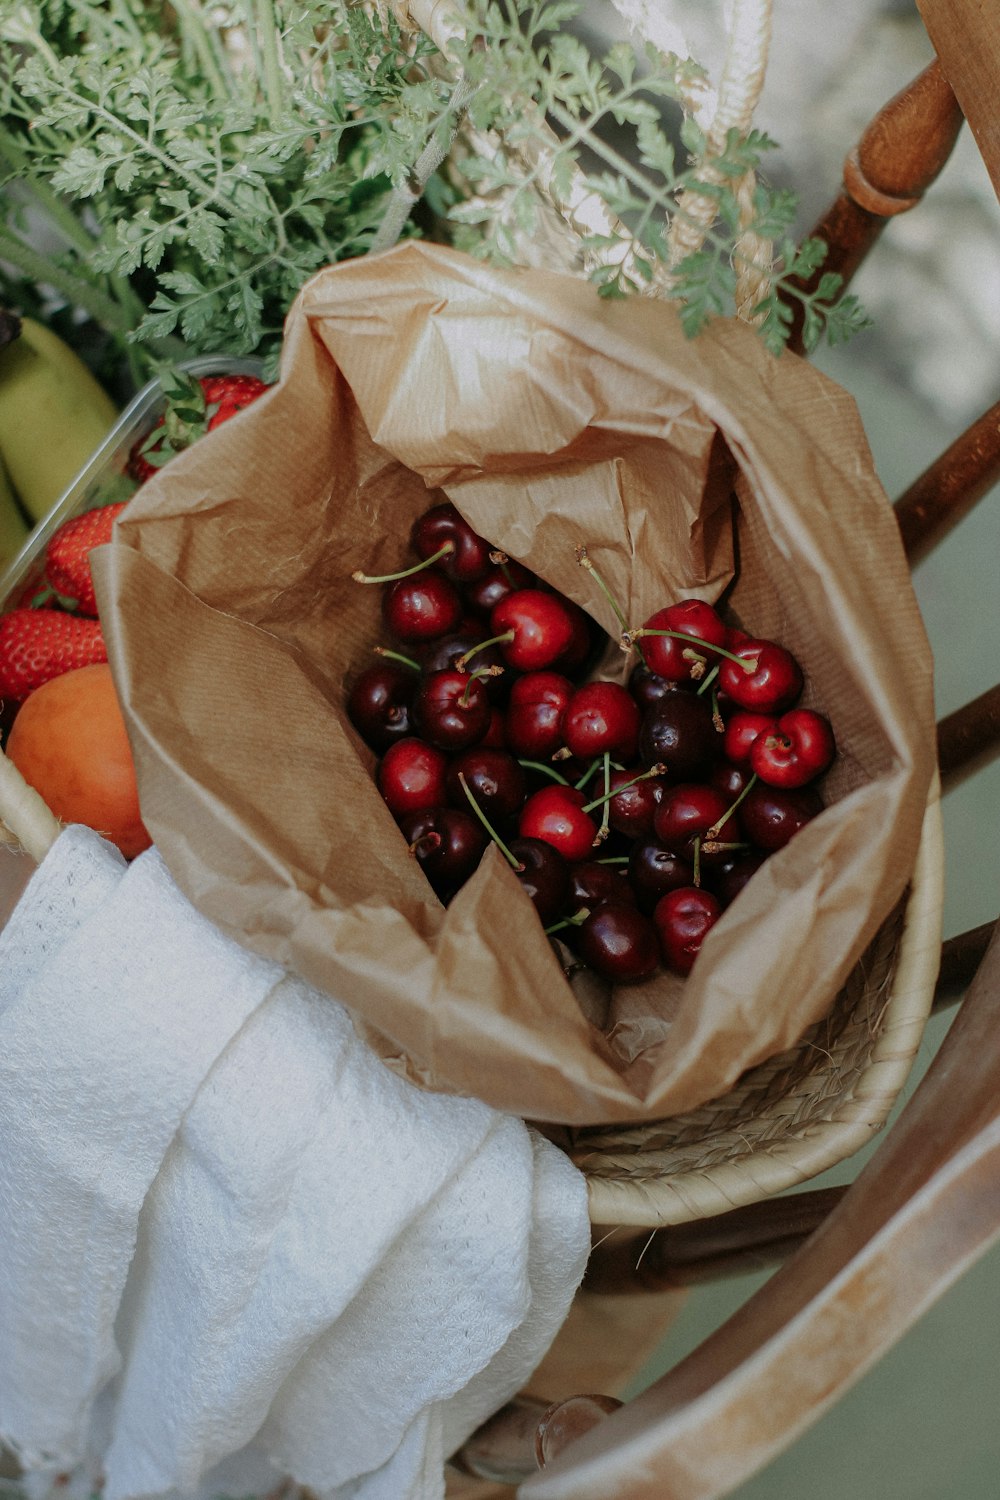 a bag of cherries sitting on top of a wooden chair